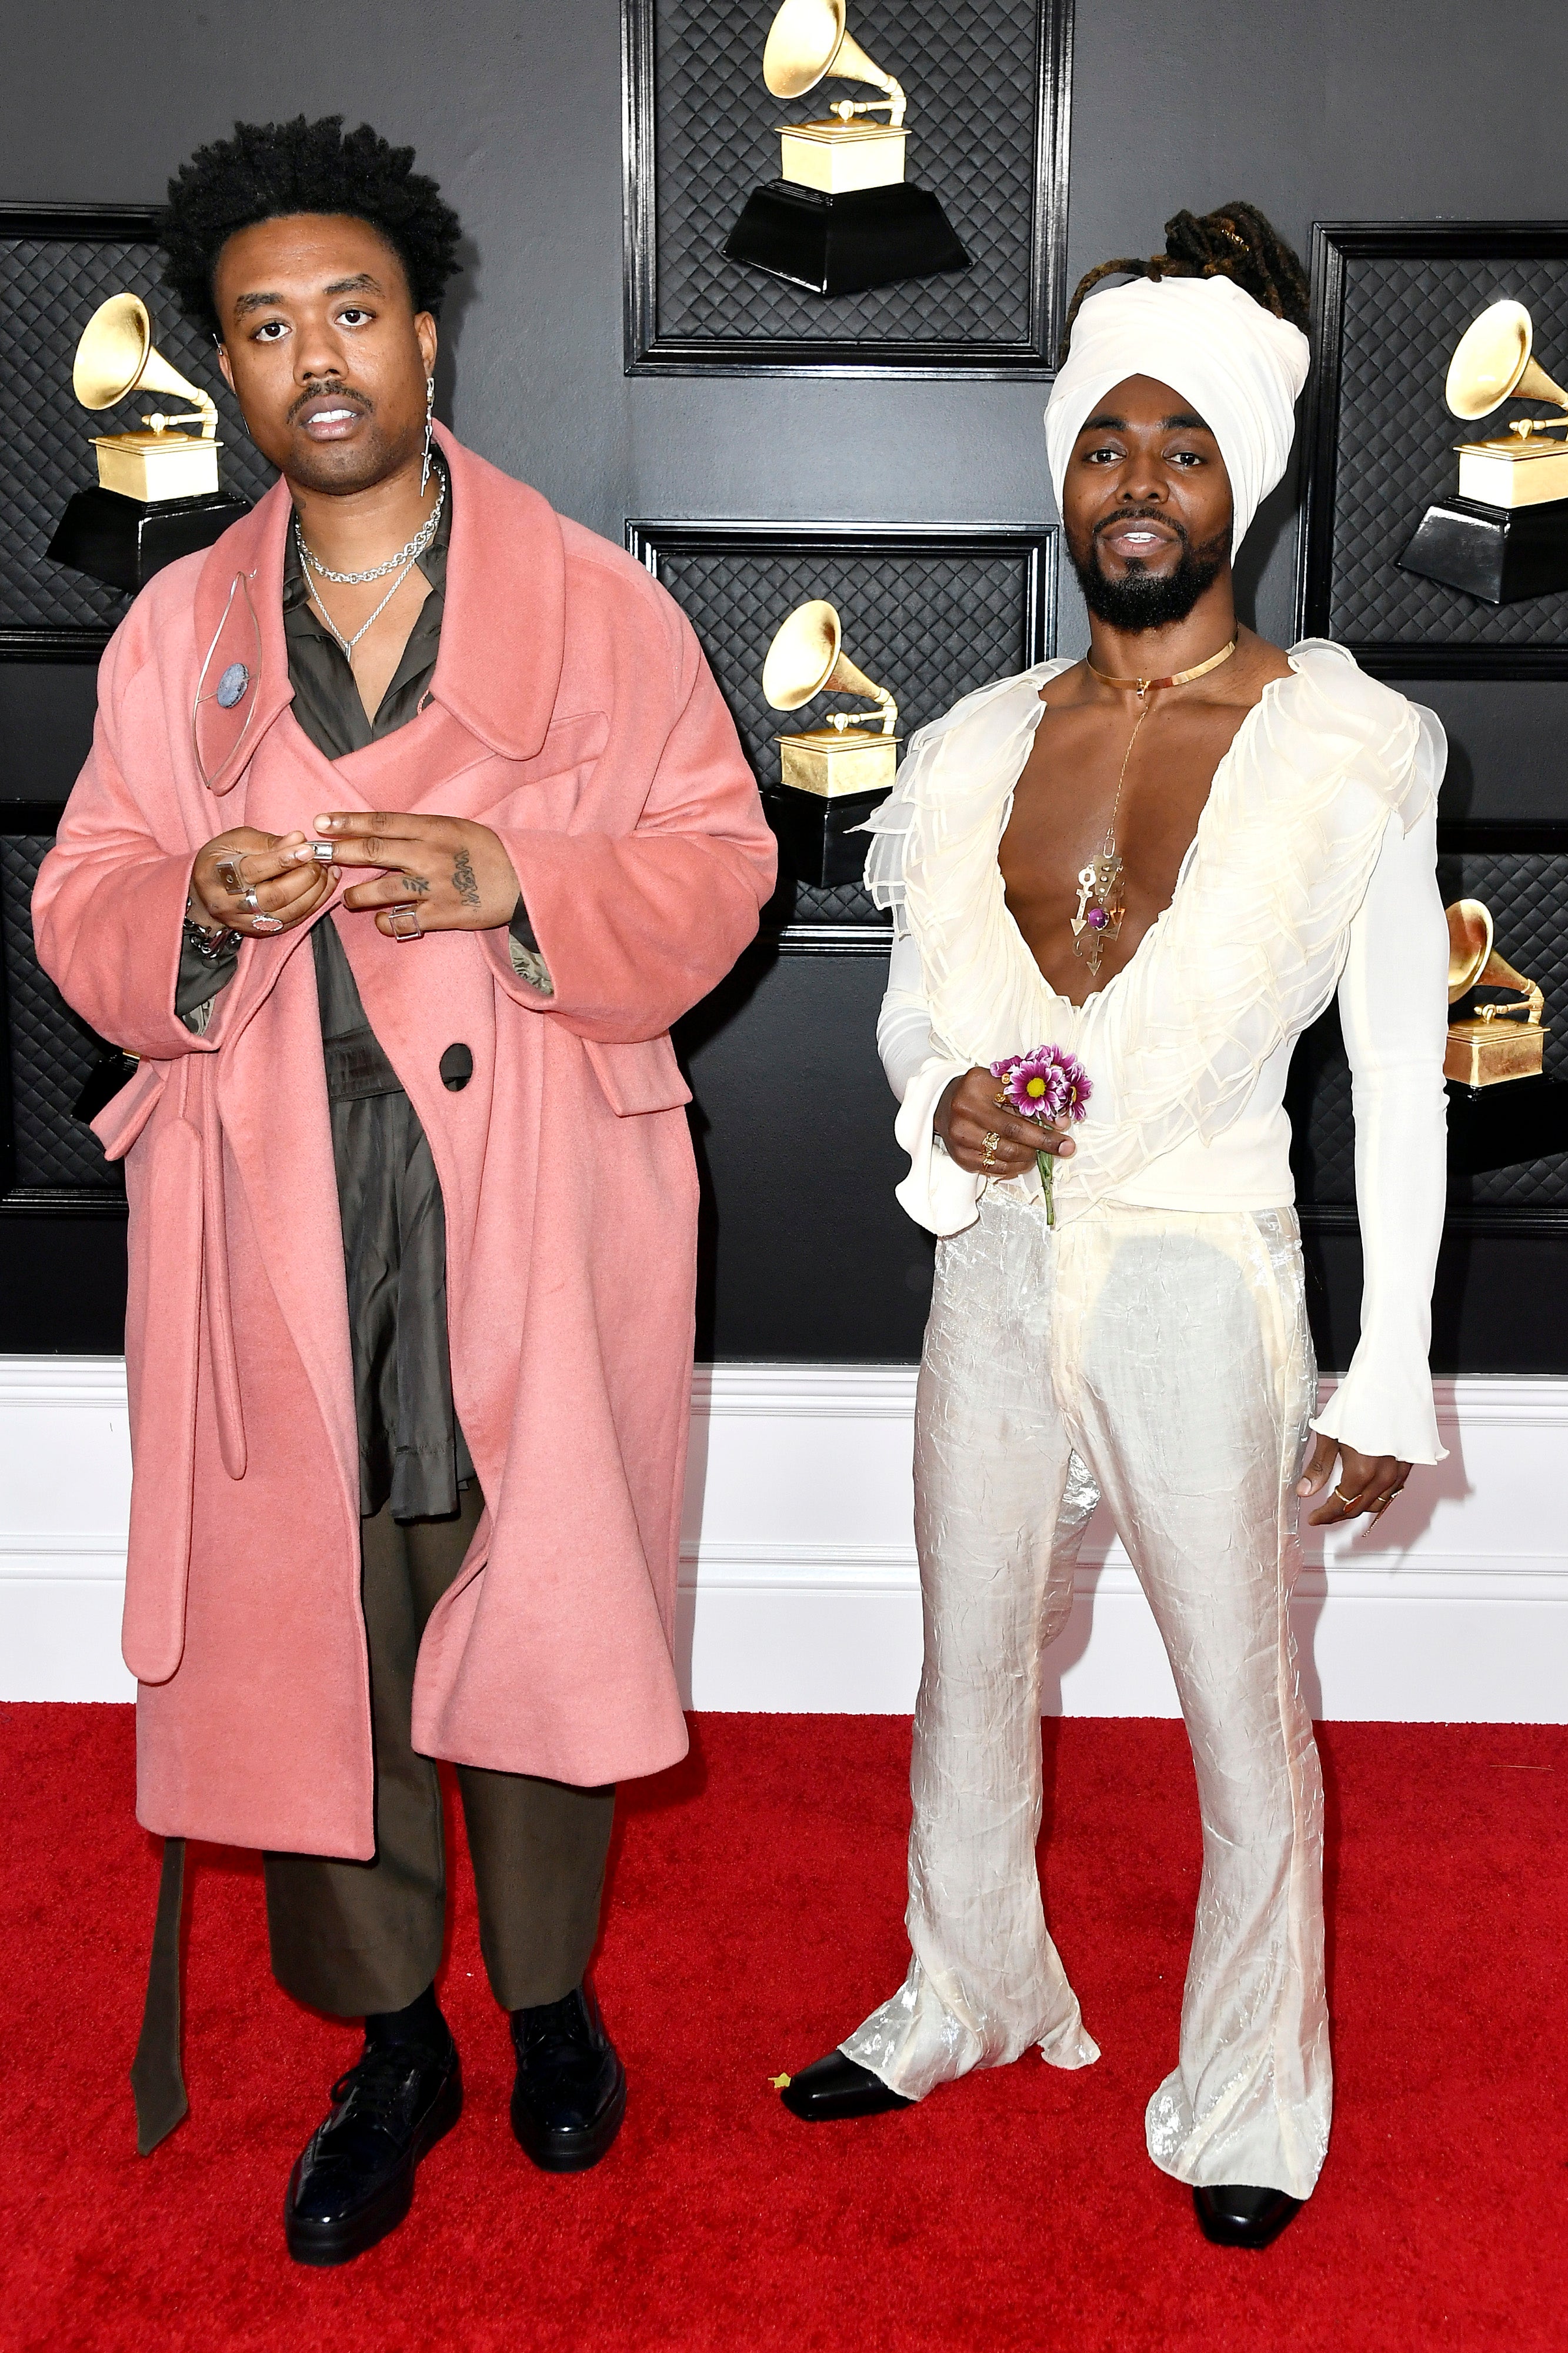 The Best Dressed Men At The 62nd Annual Grammy Awards